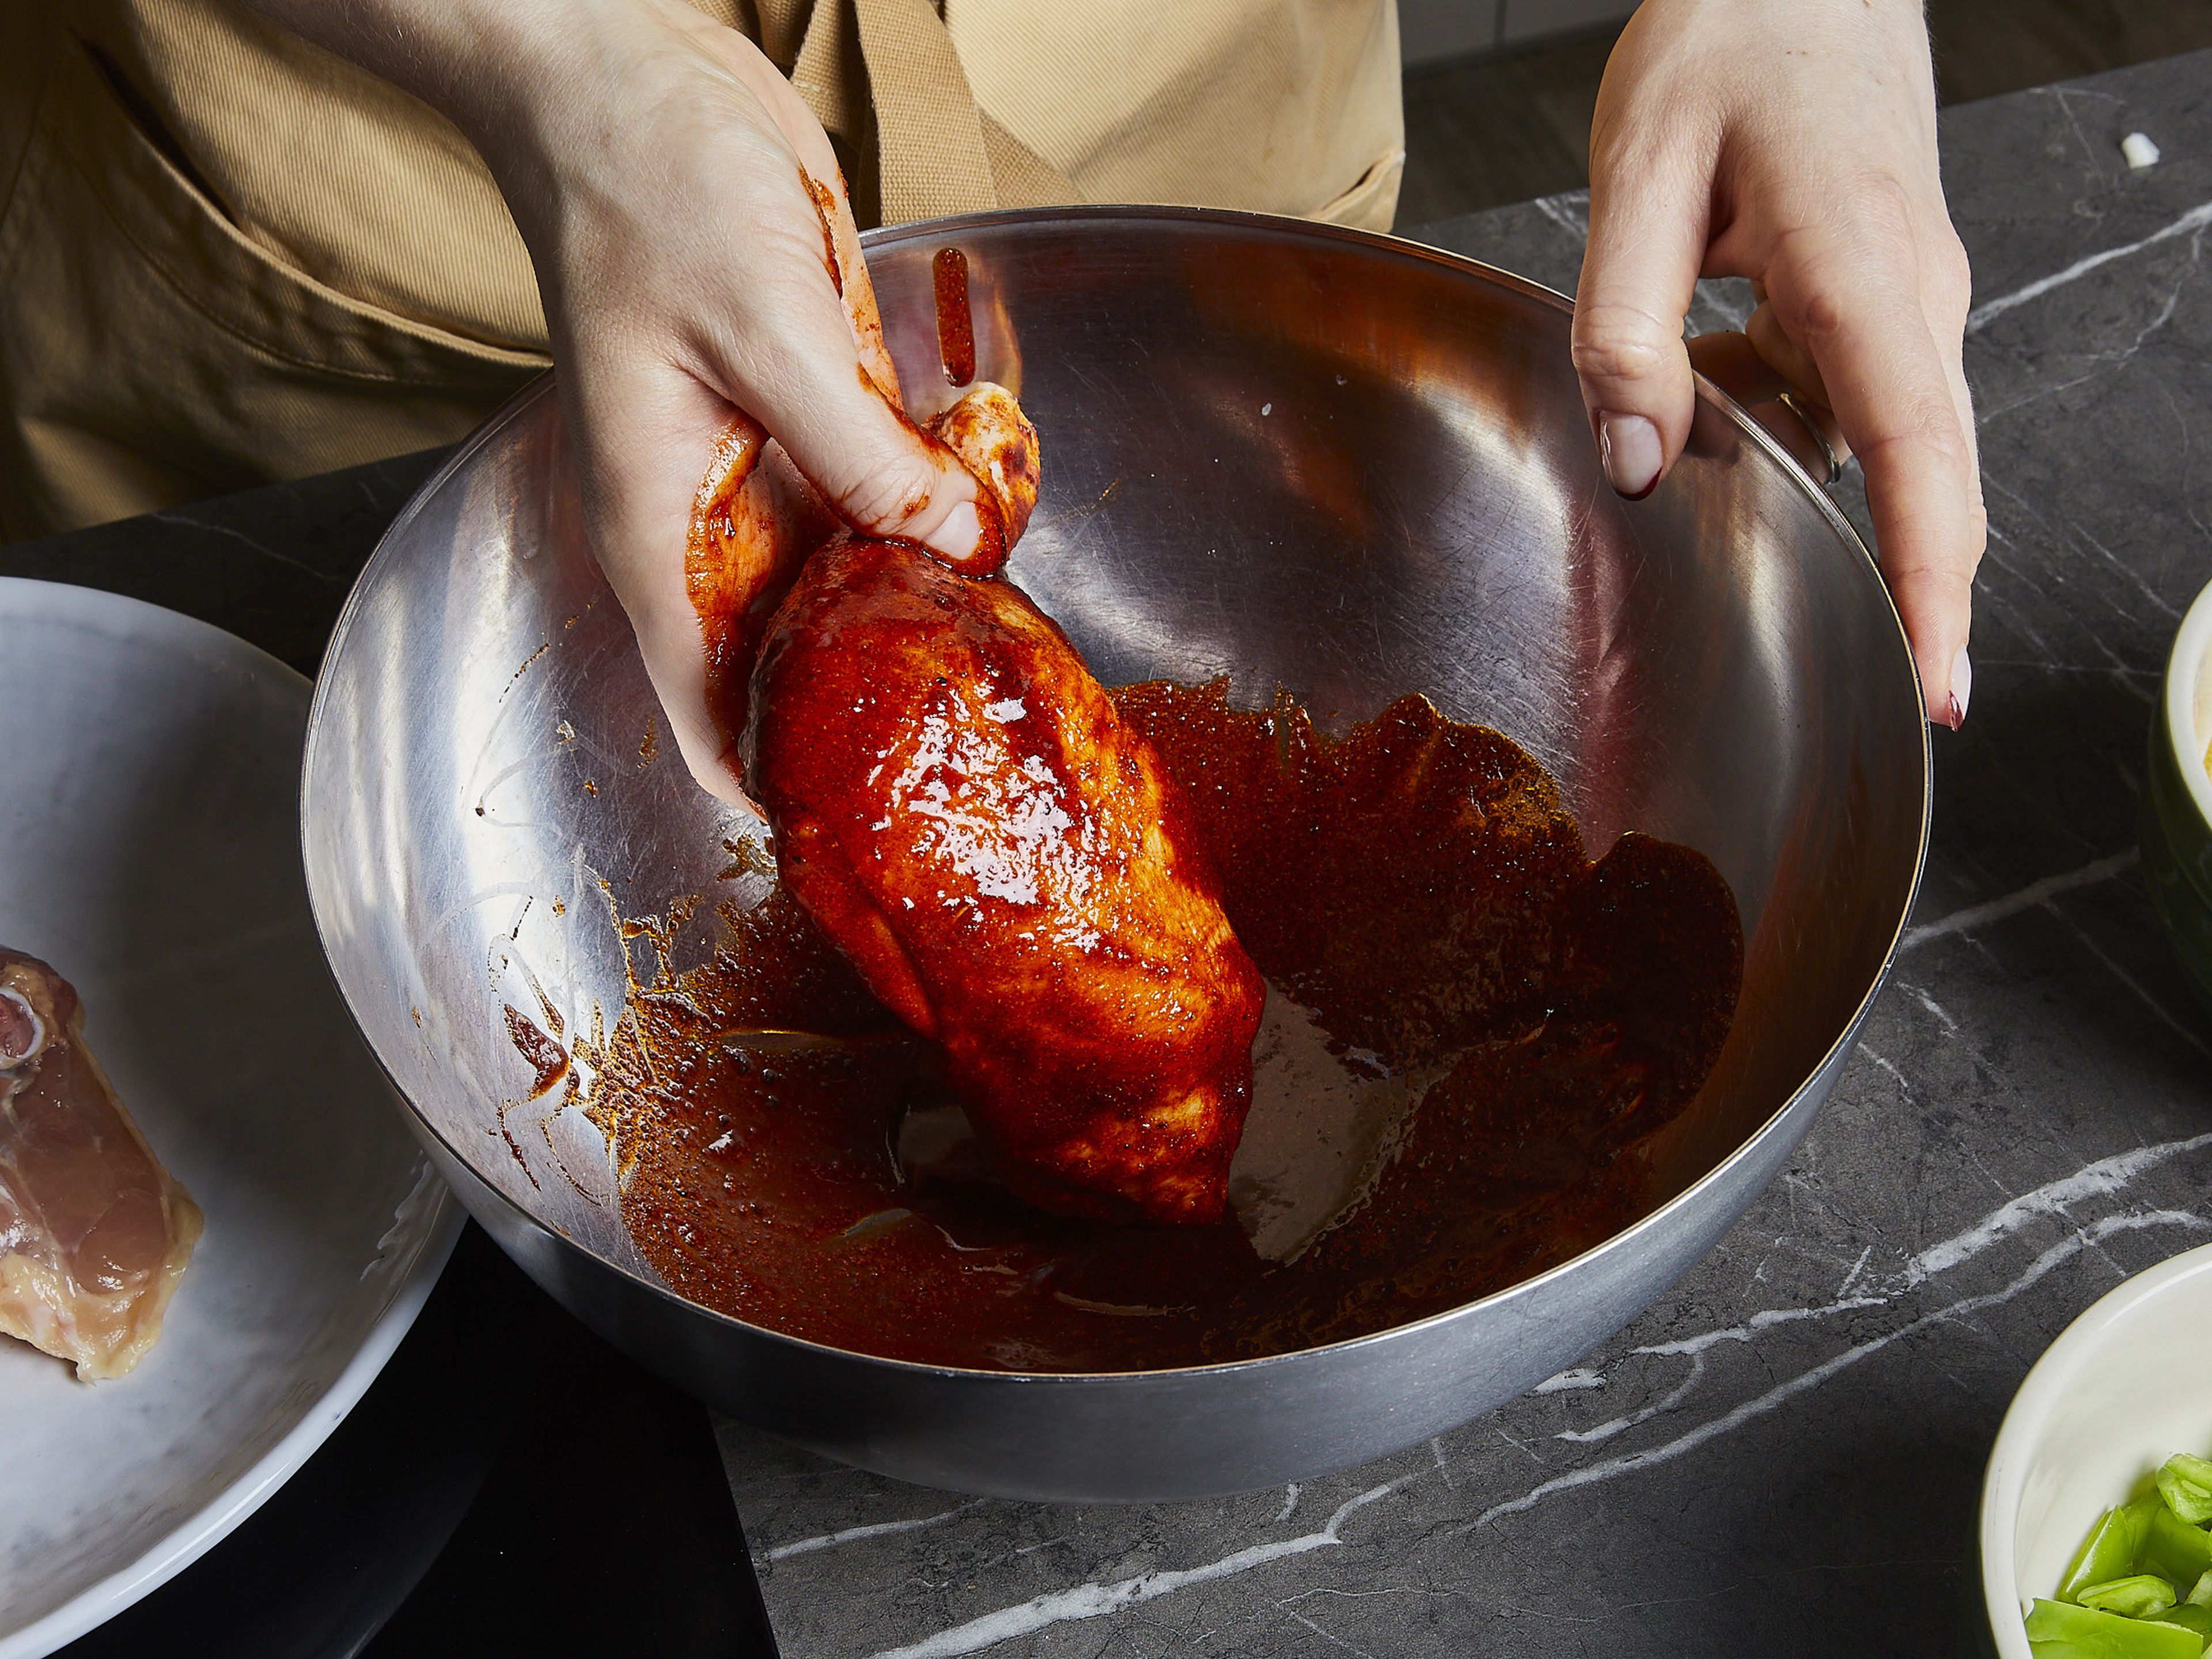 Combine ¾ of the olive oil, a heavy pinch of salt, pepper, ½ of the paprika powder, and garlic powder to make the marinade in a large bowl. Then add the chicken legs to the bowl to rub the marinade in well.